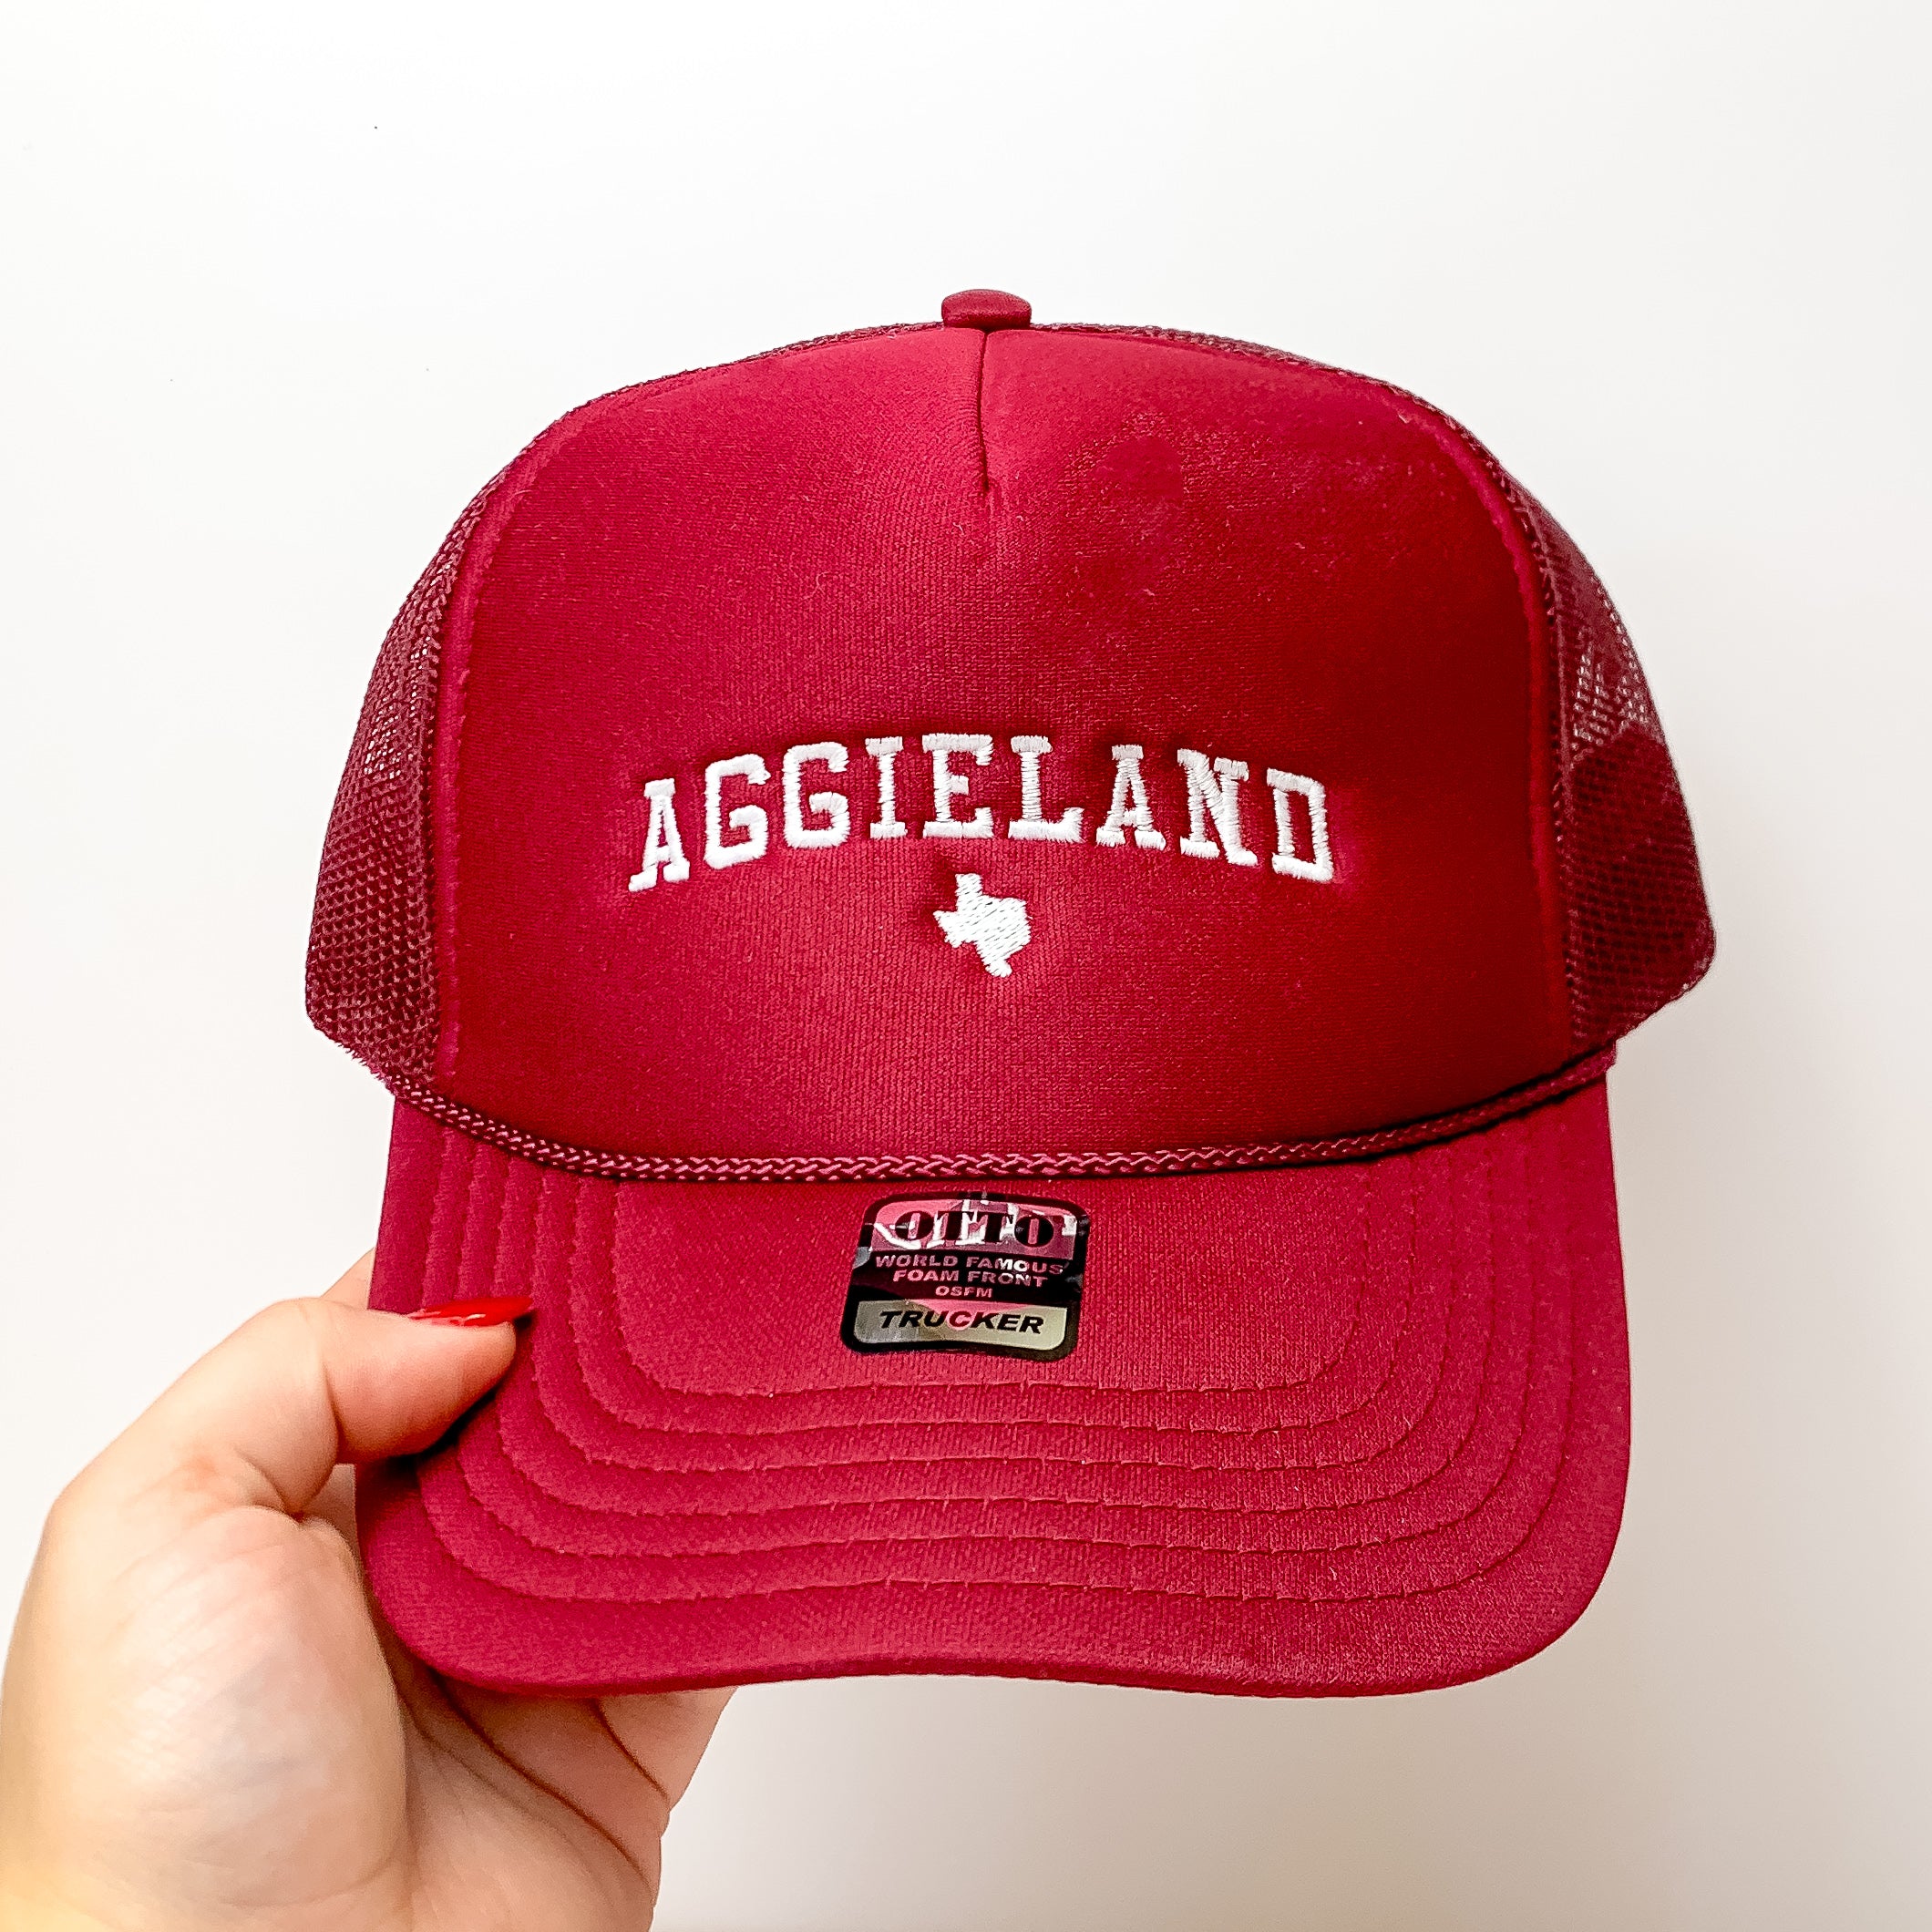 Aggieland Foam Trucker Hat in Maroon and White - Giddy Up Glamour Boutique